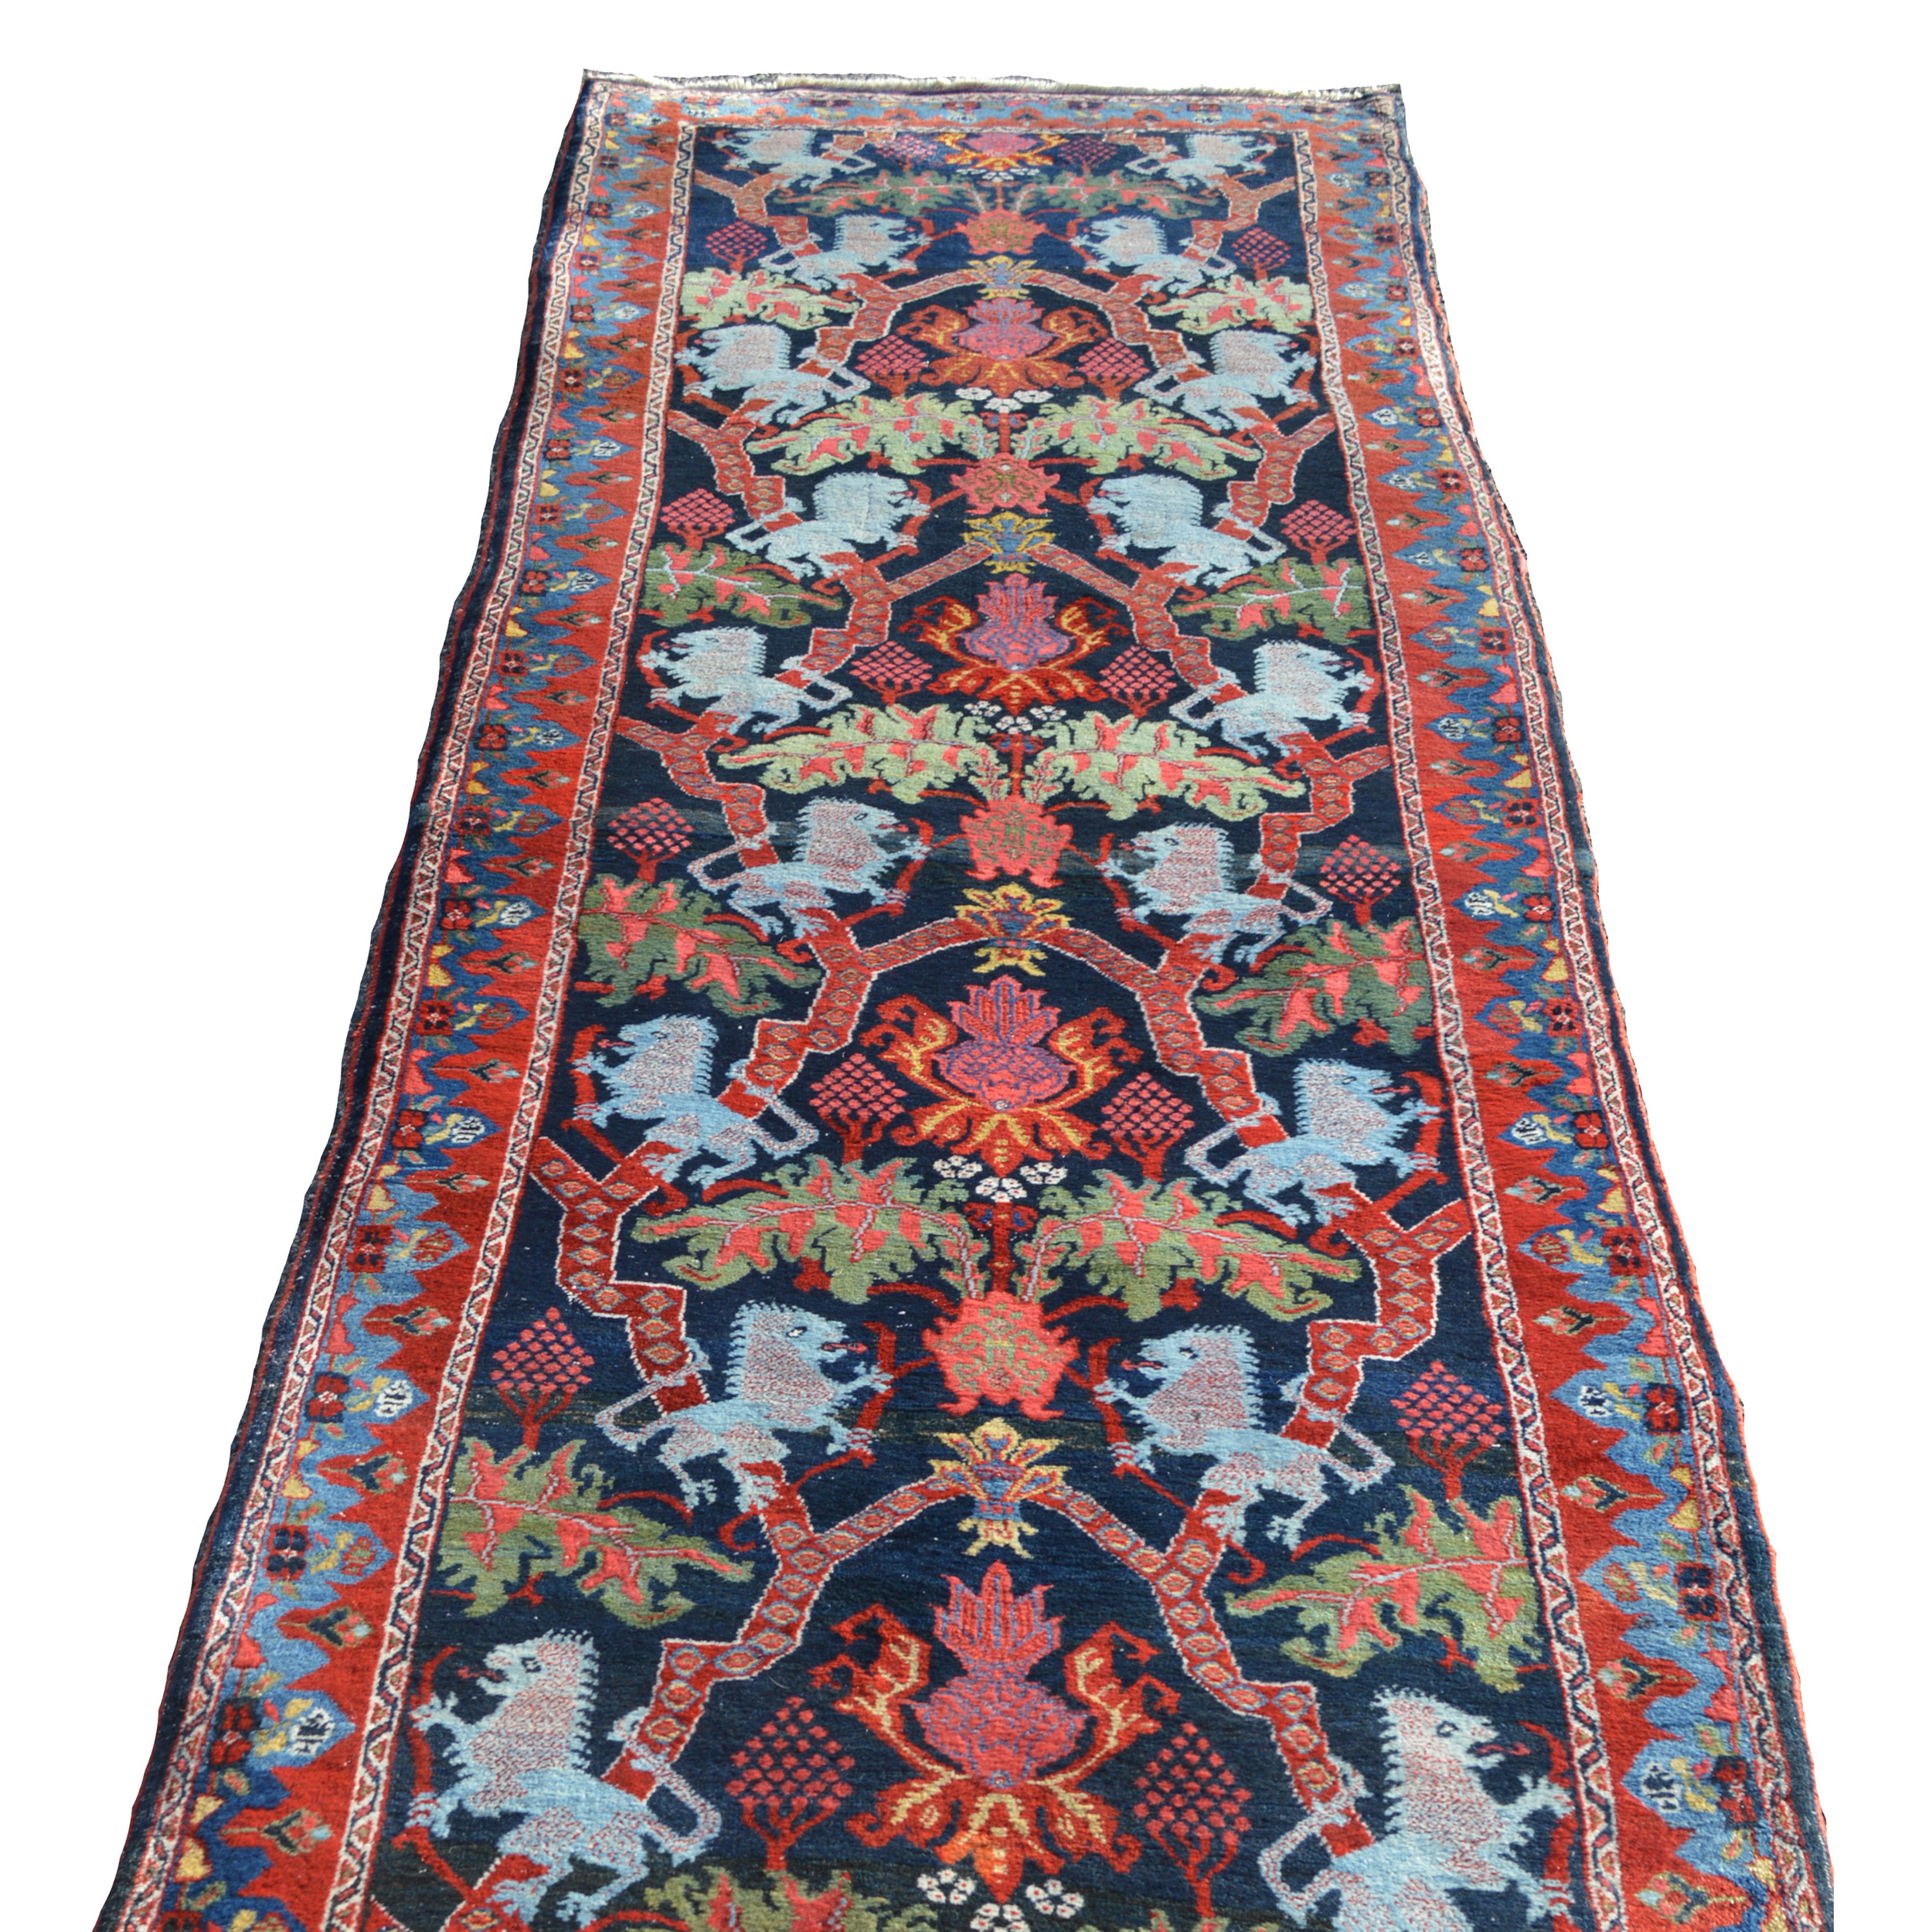 Antique northwest Persian Bidjar Lion Rug in a rare runner format. The navy blue field is decorated with Lions, strapwork, floral forms and leaves. Douglas Stock Gallery specializes in antique Persian Bidjar rugs and other Kurdish weavings from northwest Persia. Antique rugs Boston, Brookline, Newton, Weston, Wellesley, Needham, Natick,MA area, antique Oriental rugs New England, antique Persian runner rugs